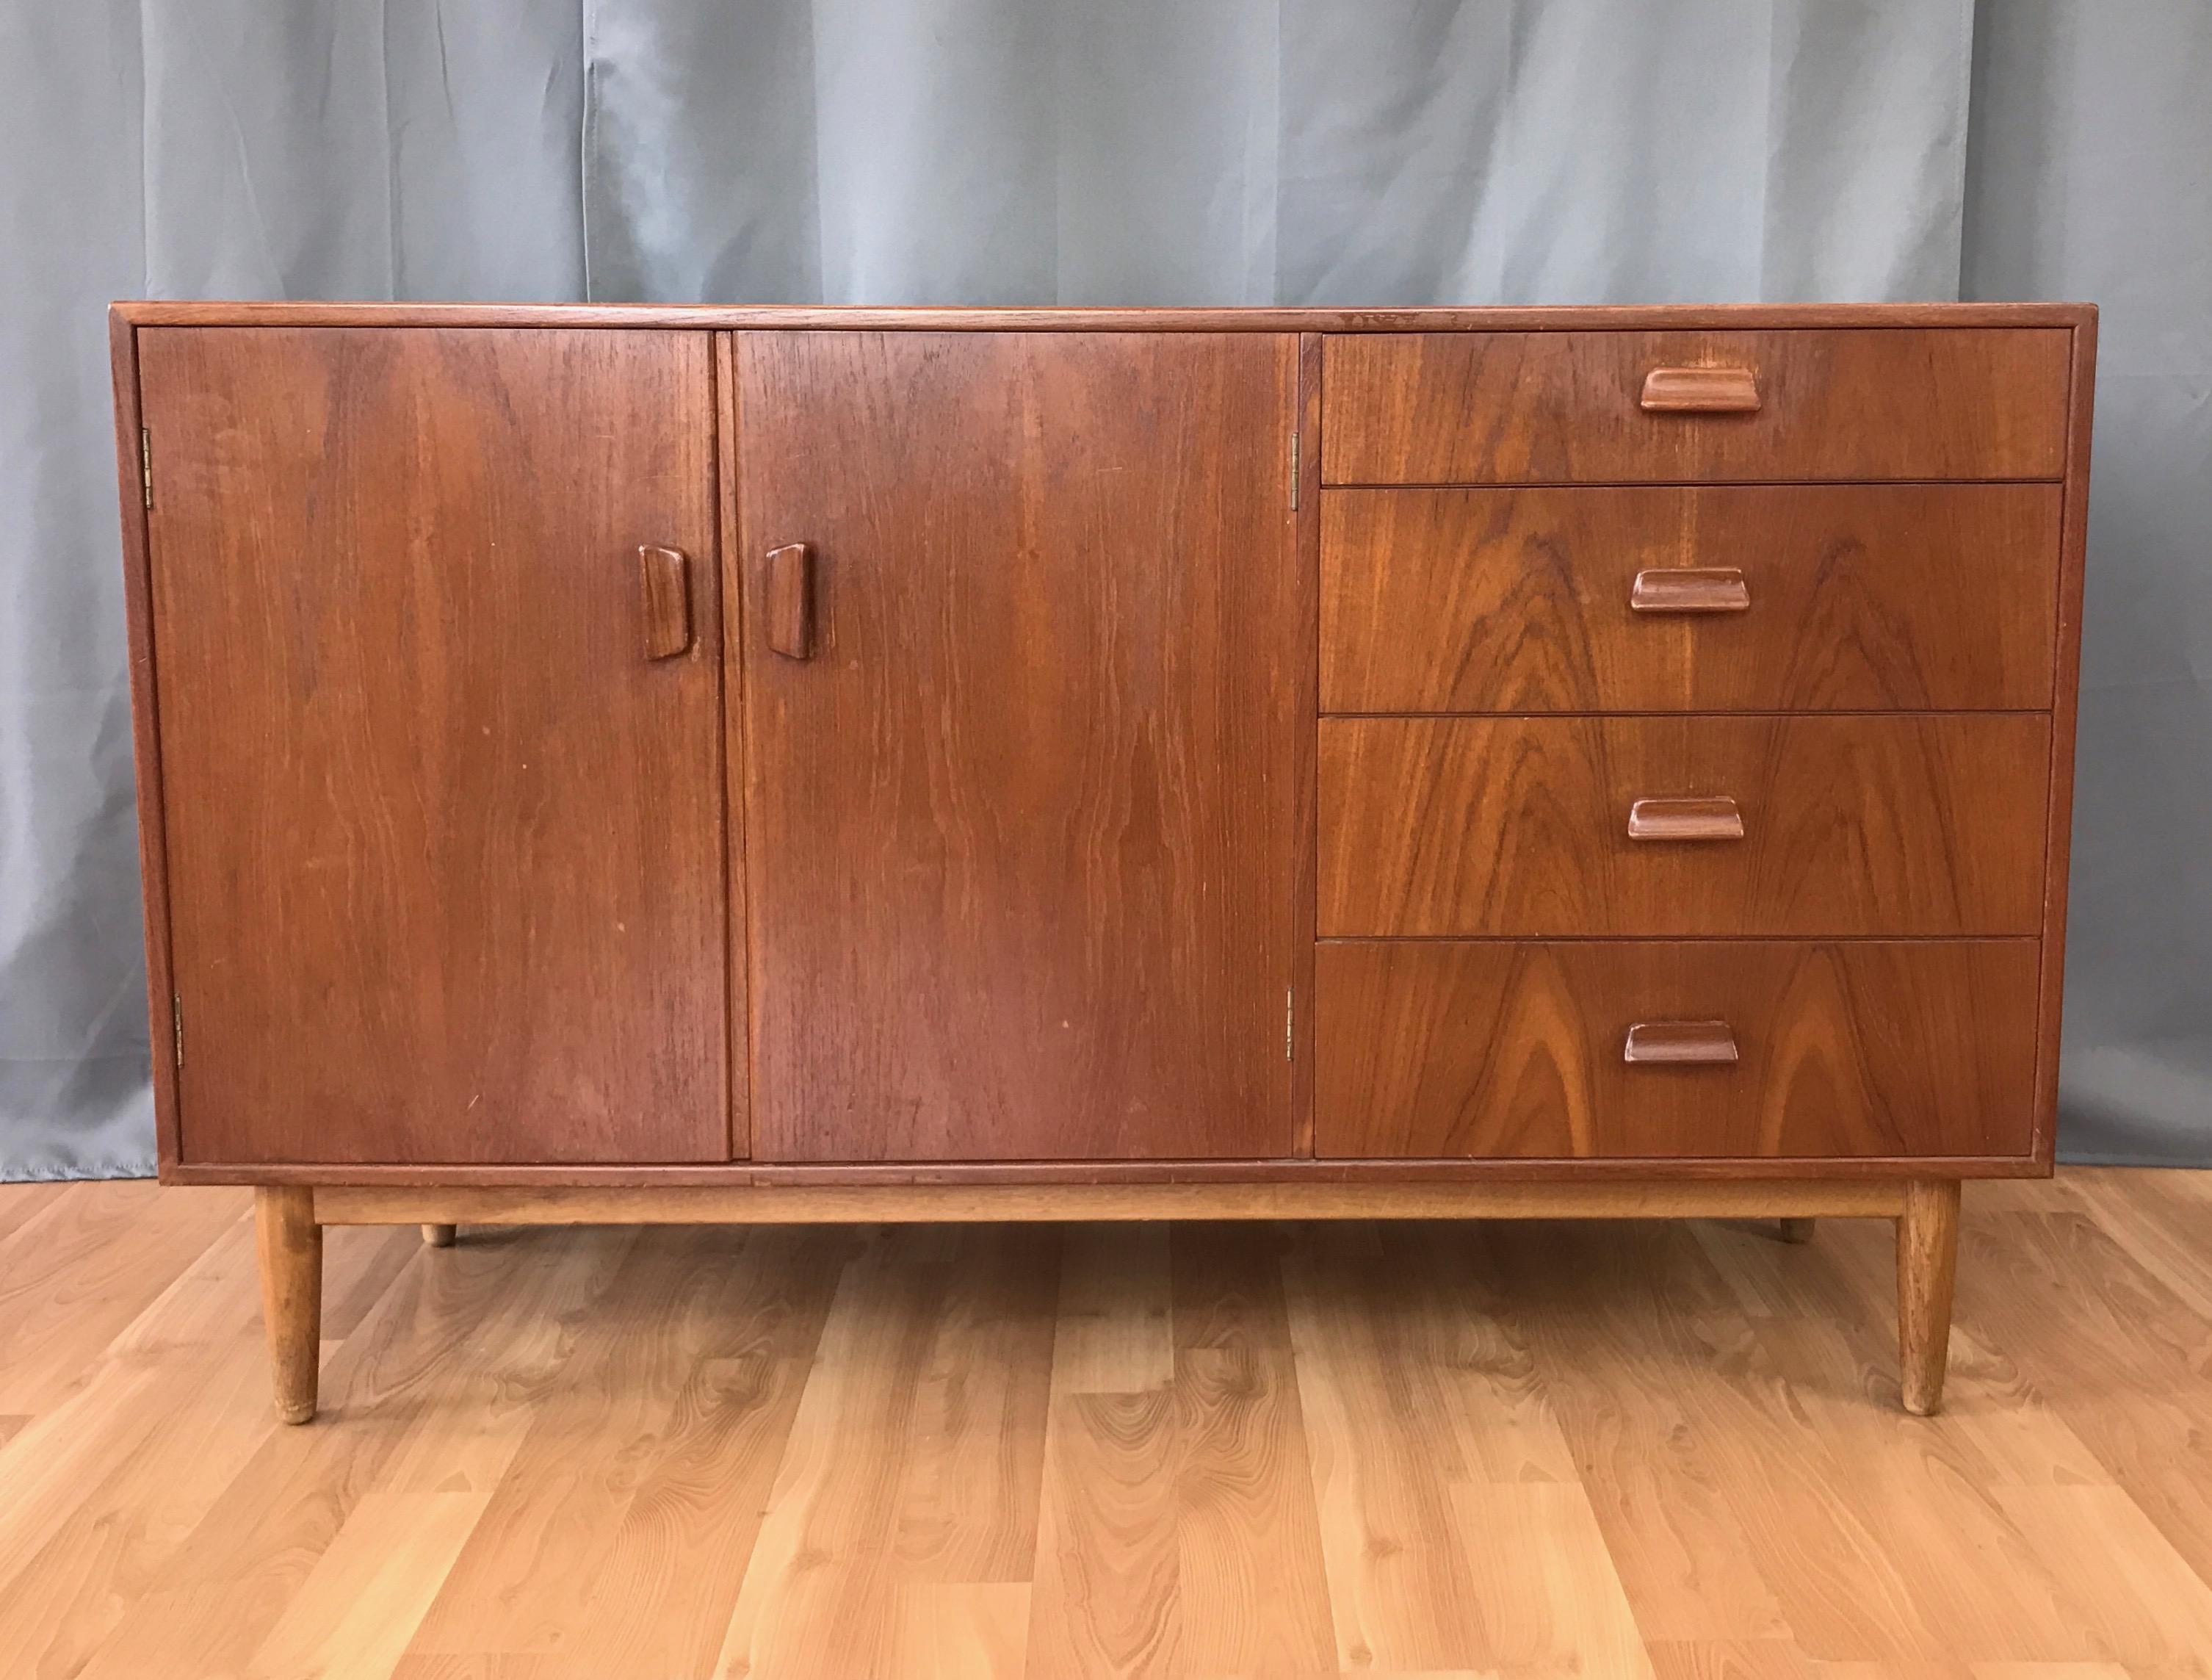 A 1960s Danish teak and white oak sideboard by Torben Strandgaard for Falster Møbelfabrik.

Finished on all sides in nicely figured bookmatched teak. Two-door cabinet with pine interior and a pair of adjustable height shelves. Four drawers, the